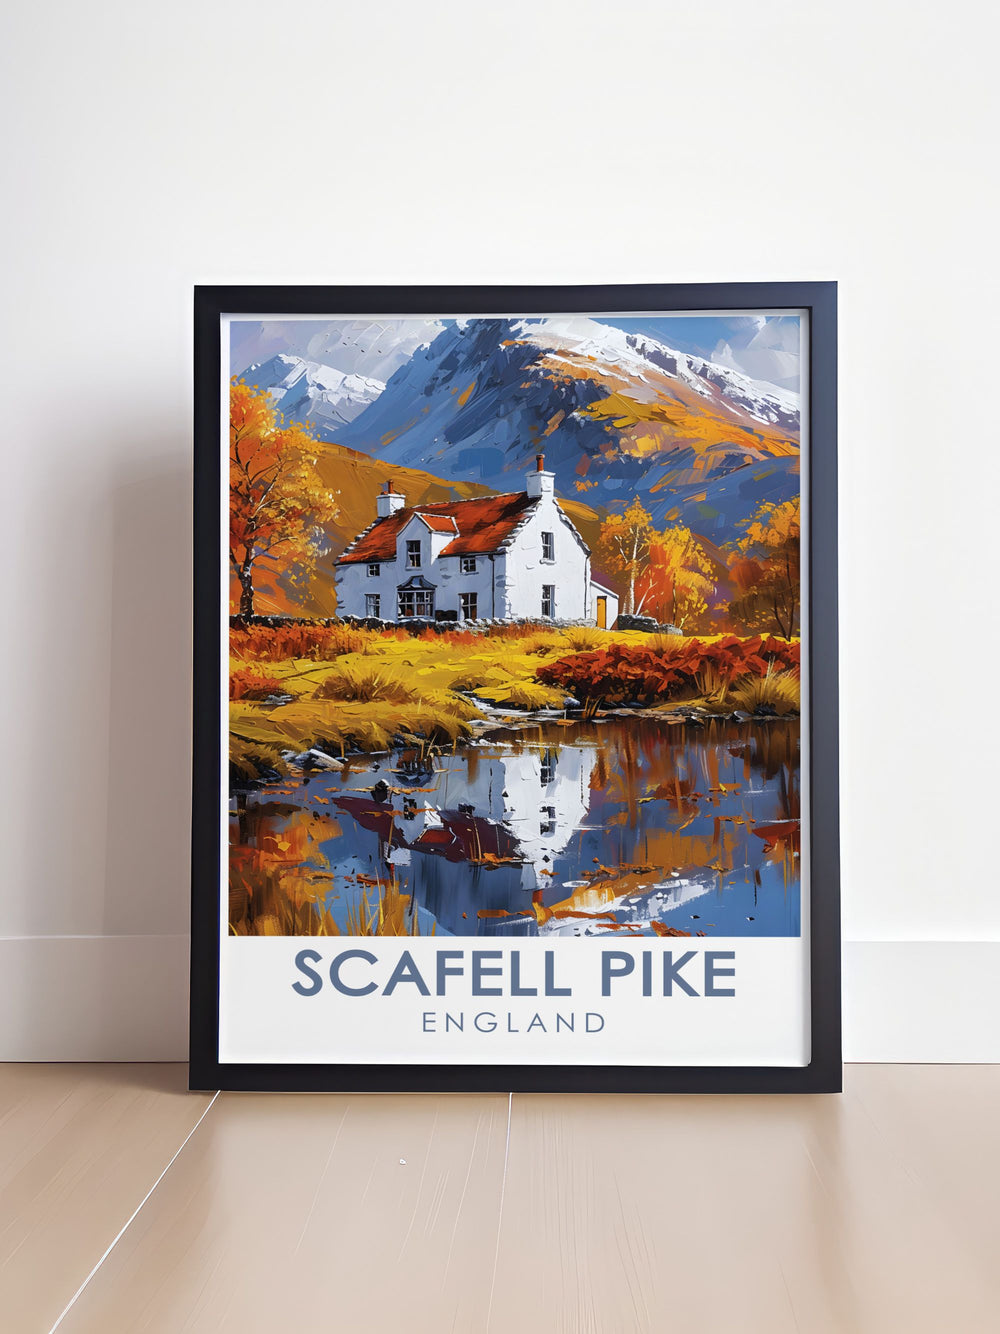 Celebrate the sense of accomplishment with this Scafell Pike summit print, showcasing the panoramic views that stretch to Scotland, Wales, and the Isle of Man. Ideal for inspiring future hiking adventures.